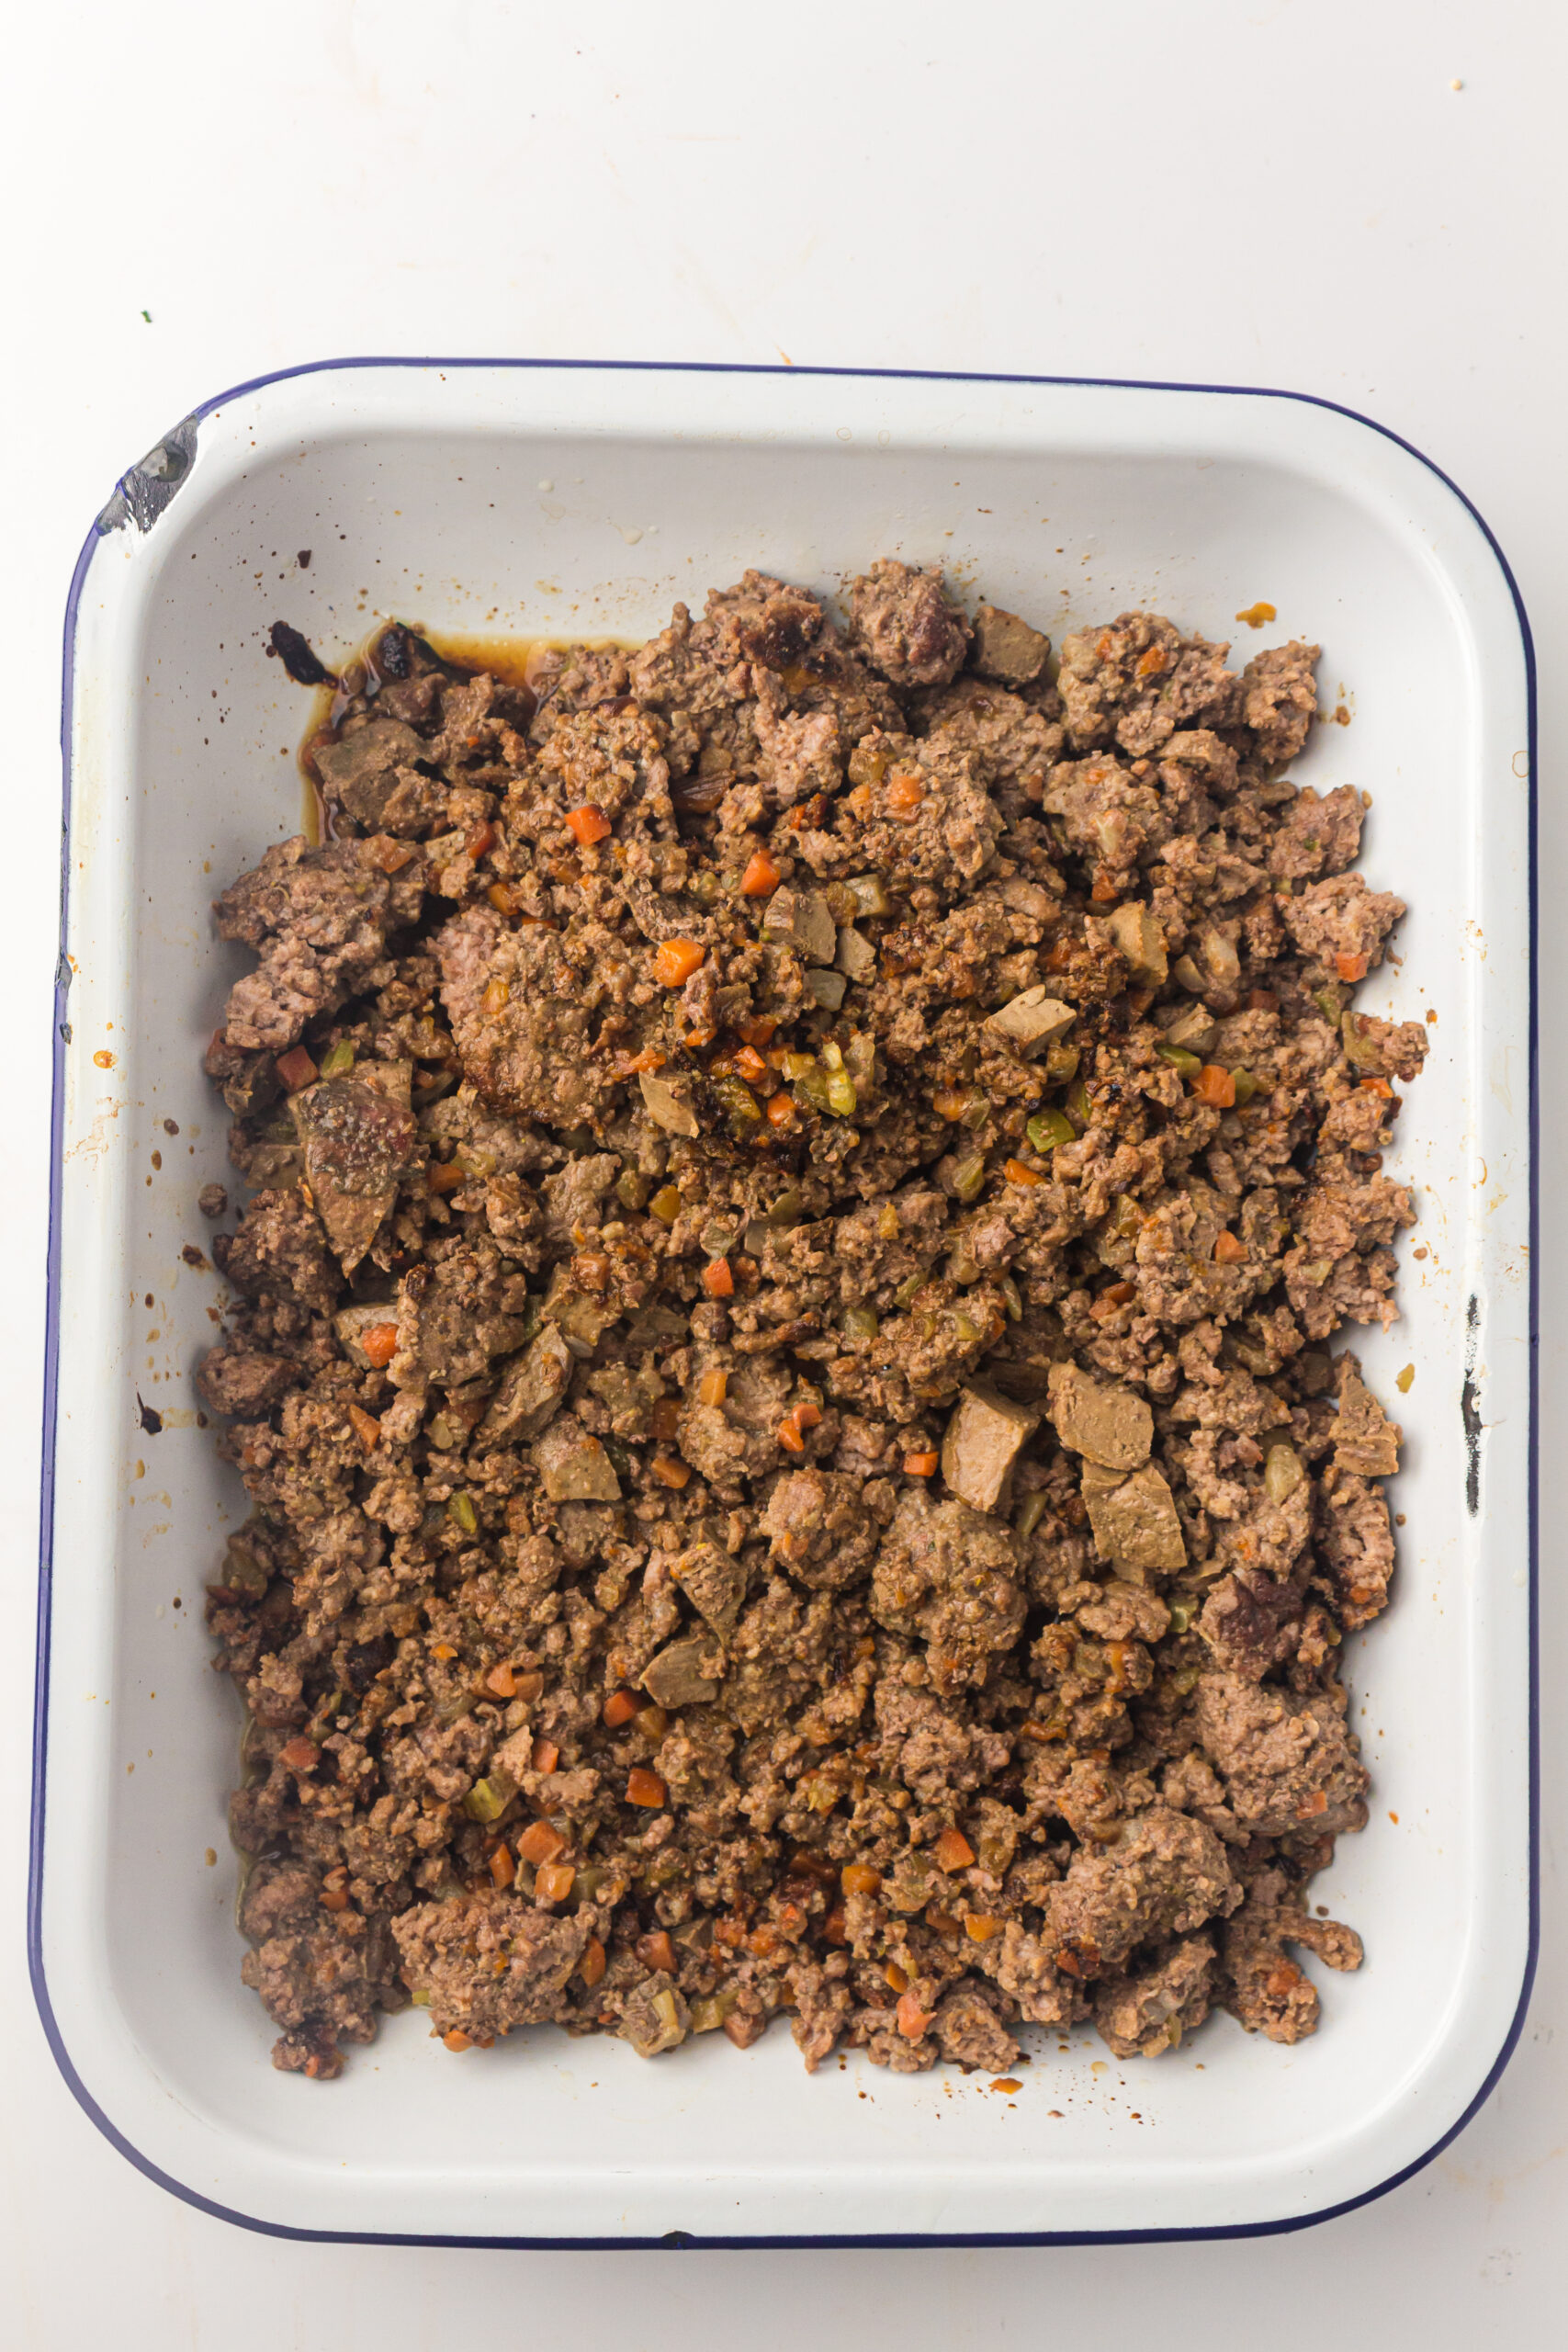 Place liver and mince mix into a oven proof dish